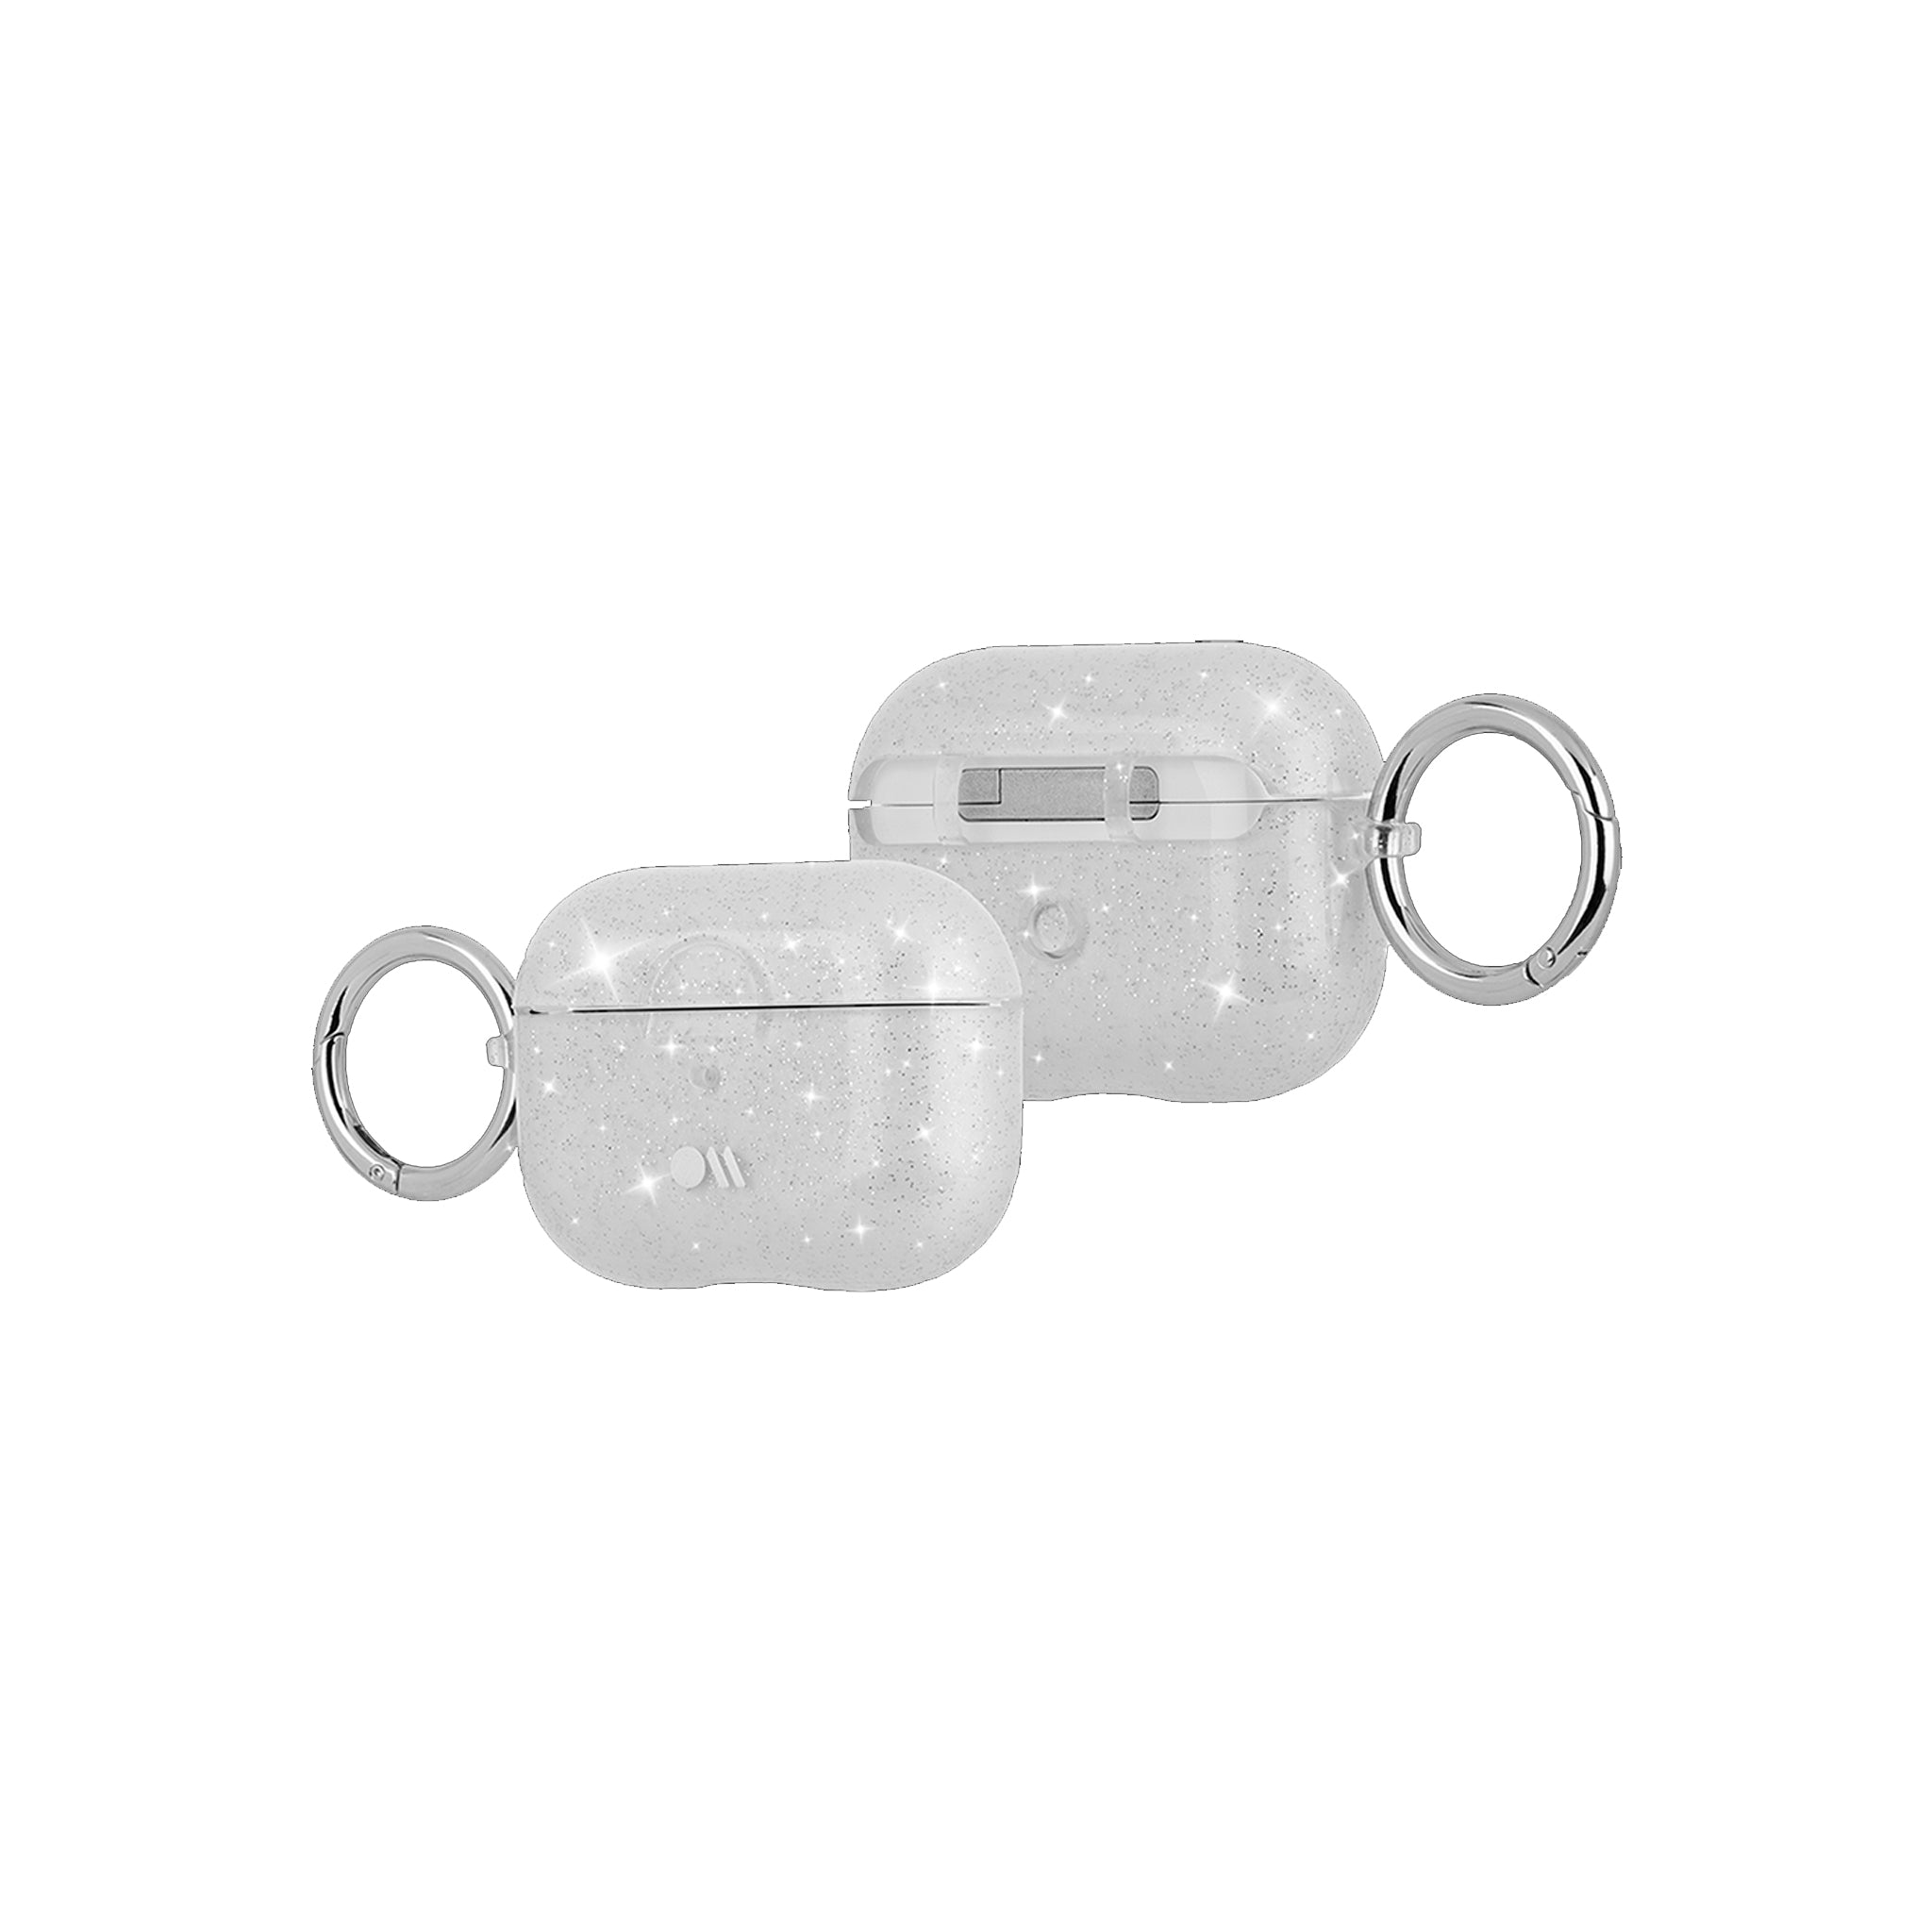 Case-mate - Sheer Crystal Case For Apple Airpods Pro - Clear